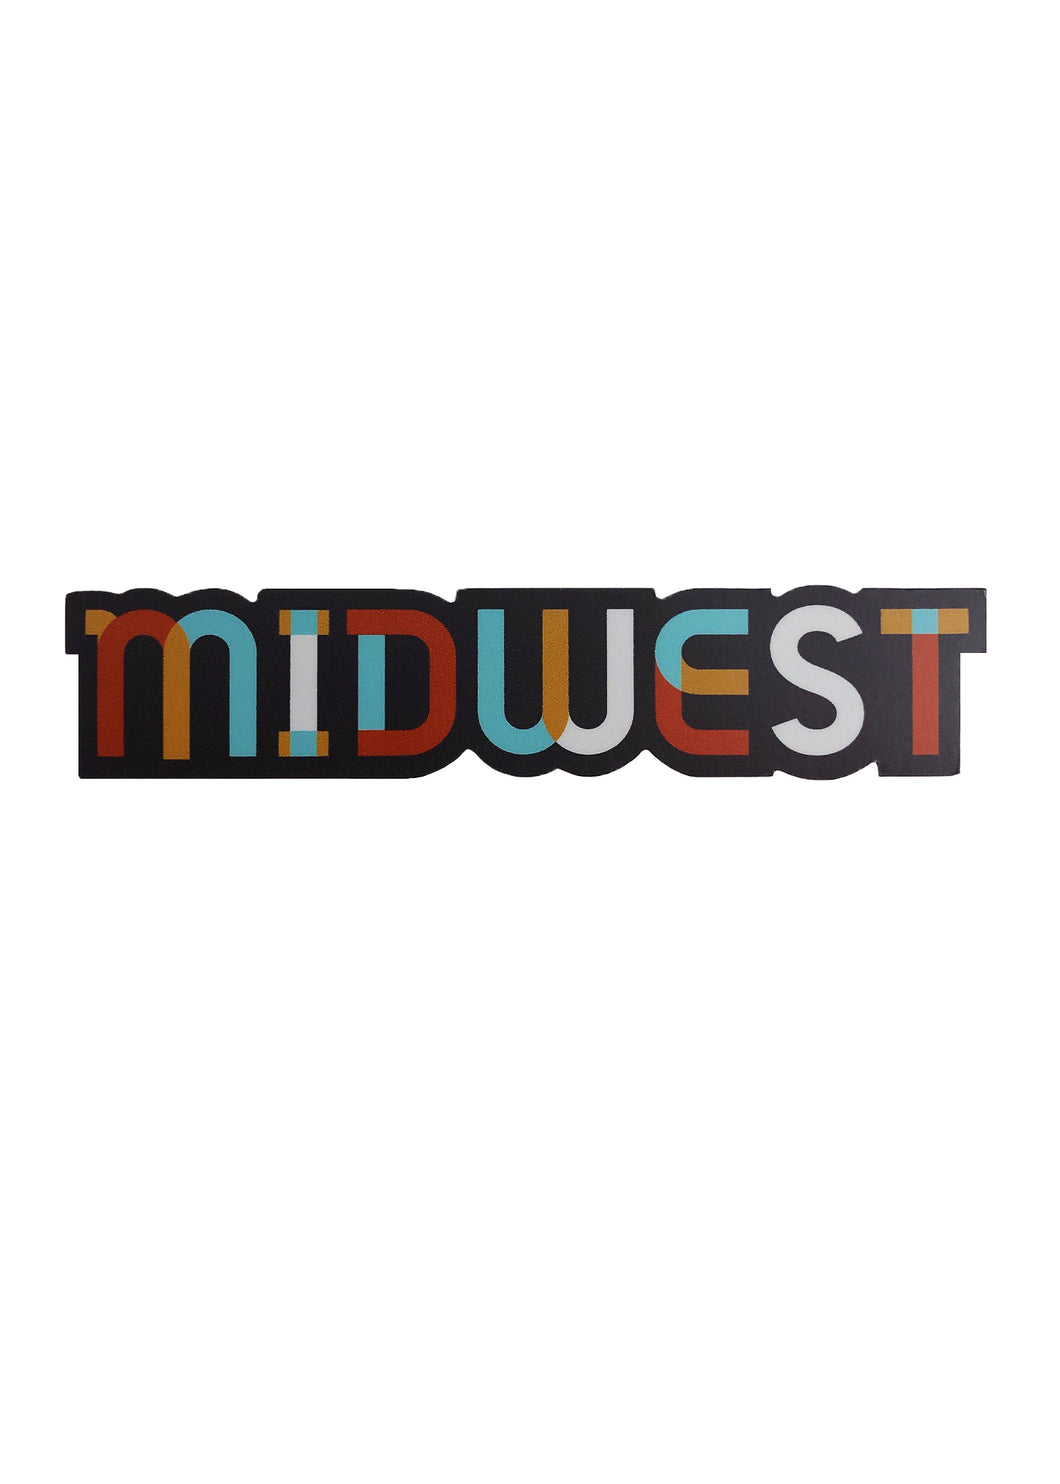 Colorblock Midwest Sticker - Tigertree